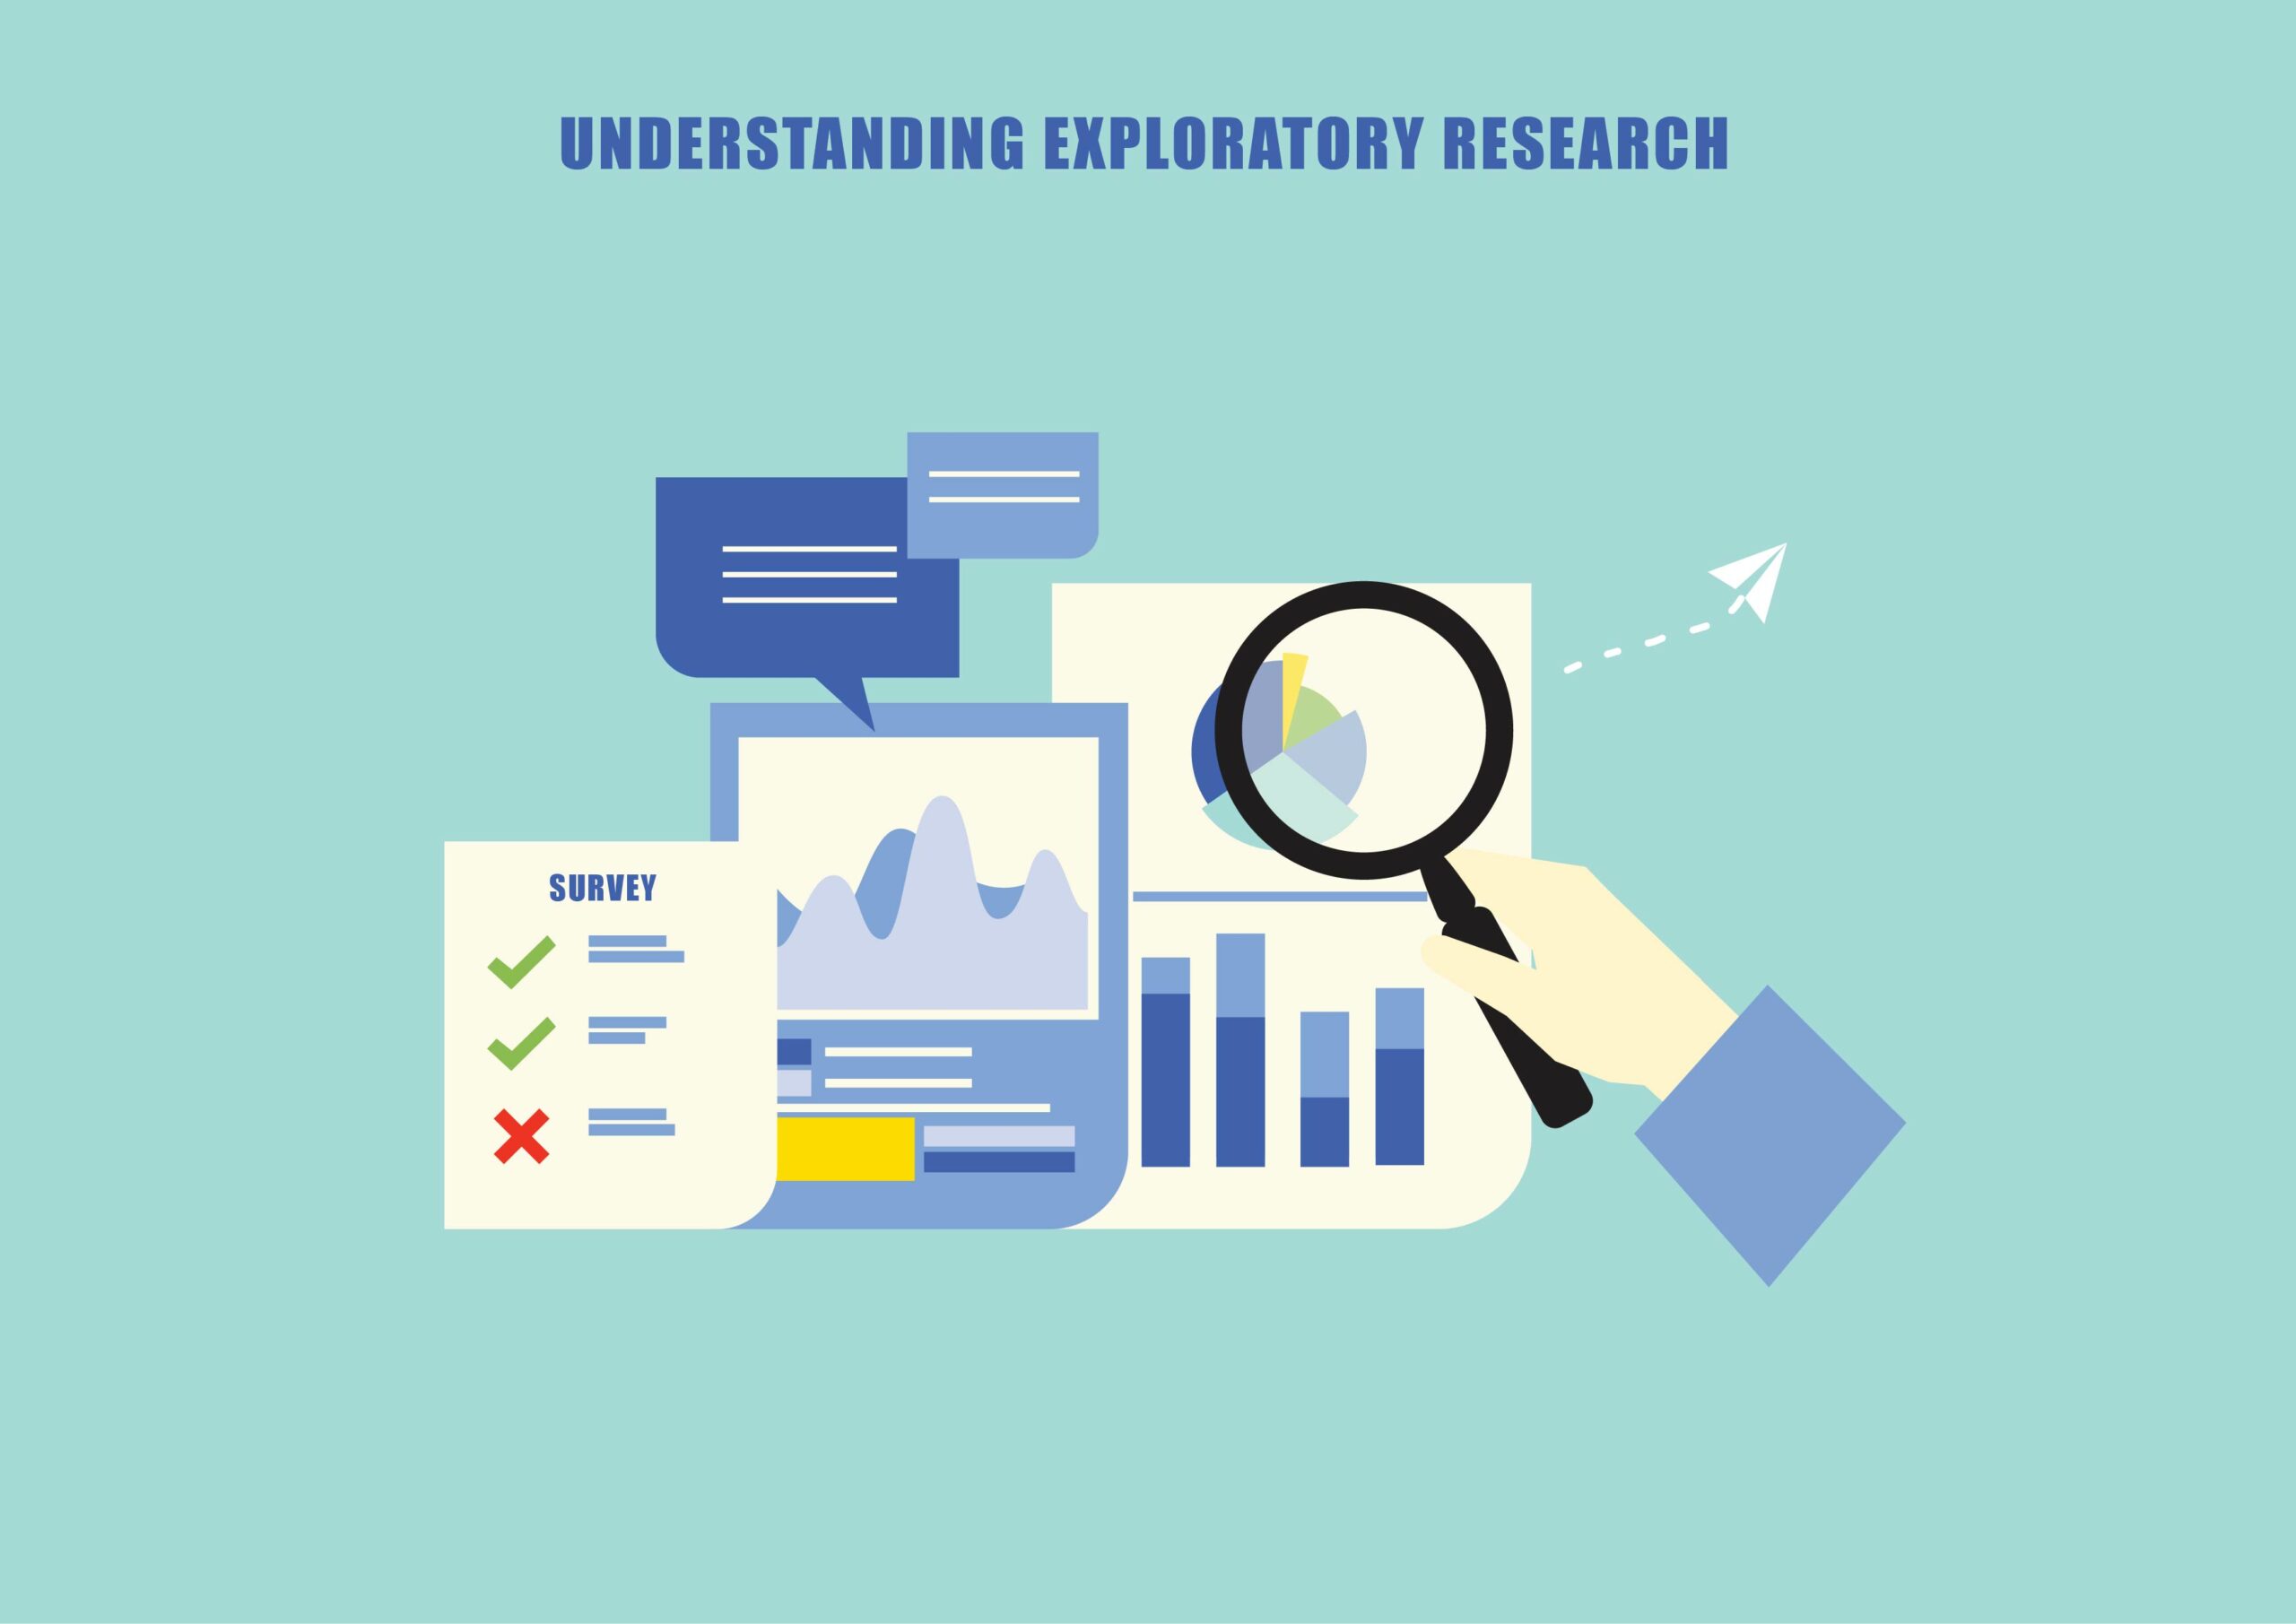 exploratory case study is also called as